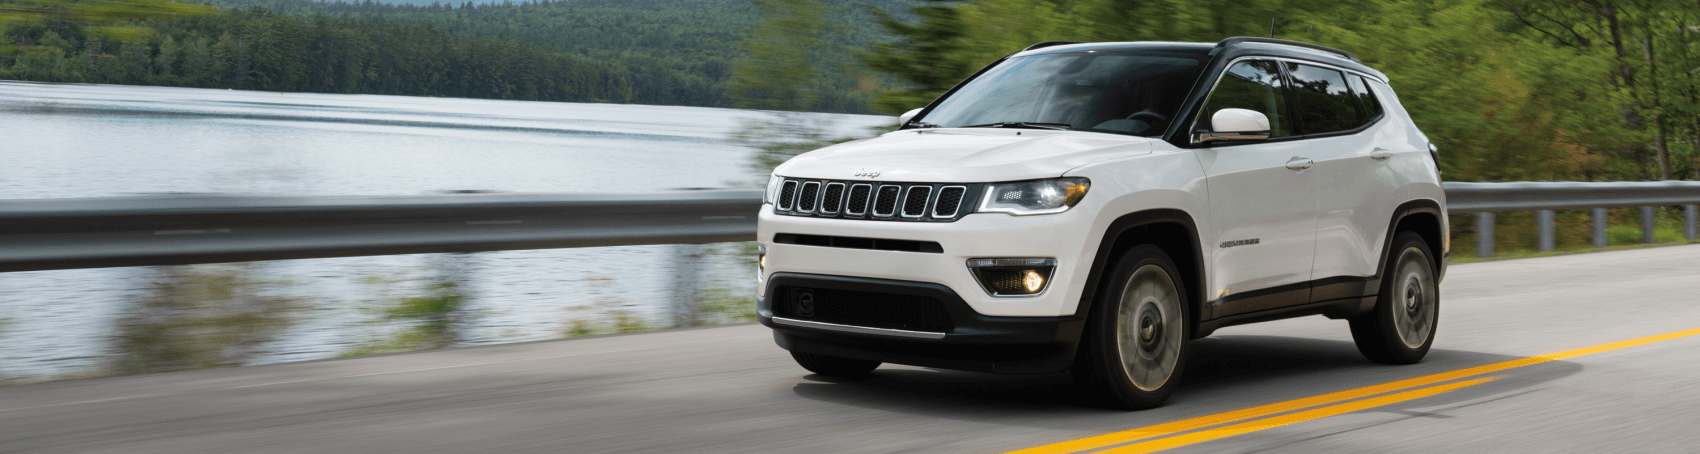 2021 Jeep Compass Limited Pearl White Mountain Road Feldman CDJR of Woodhaven